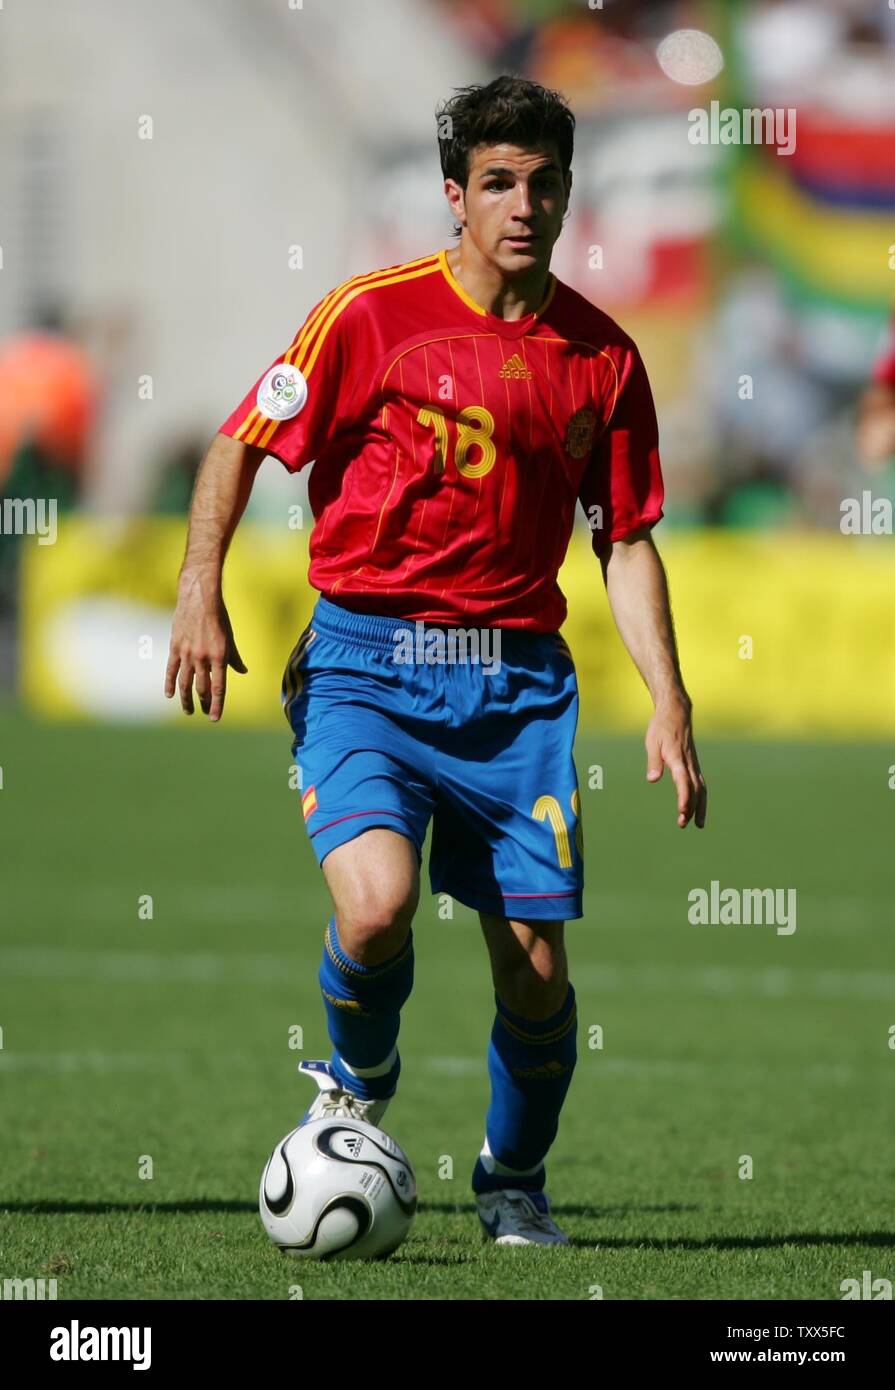 Spain's Cesc Fabregas during the final Group H match of the FIFA World Cup Germany 2006 in Kaiserslautern, Germany on June 23, 2006. Spain advanced to the round of 16 as they beat Saudi Arabia 1-0. Juanito's goal off his head in the 36th-minute  confirmed the Saudi elimination after one draw and two defeats. (UPI  Photo/Christian Brunskill) Stock Photo